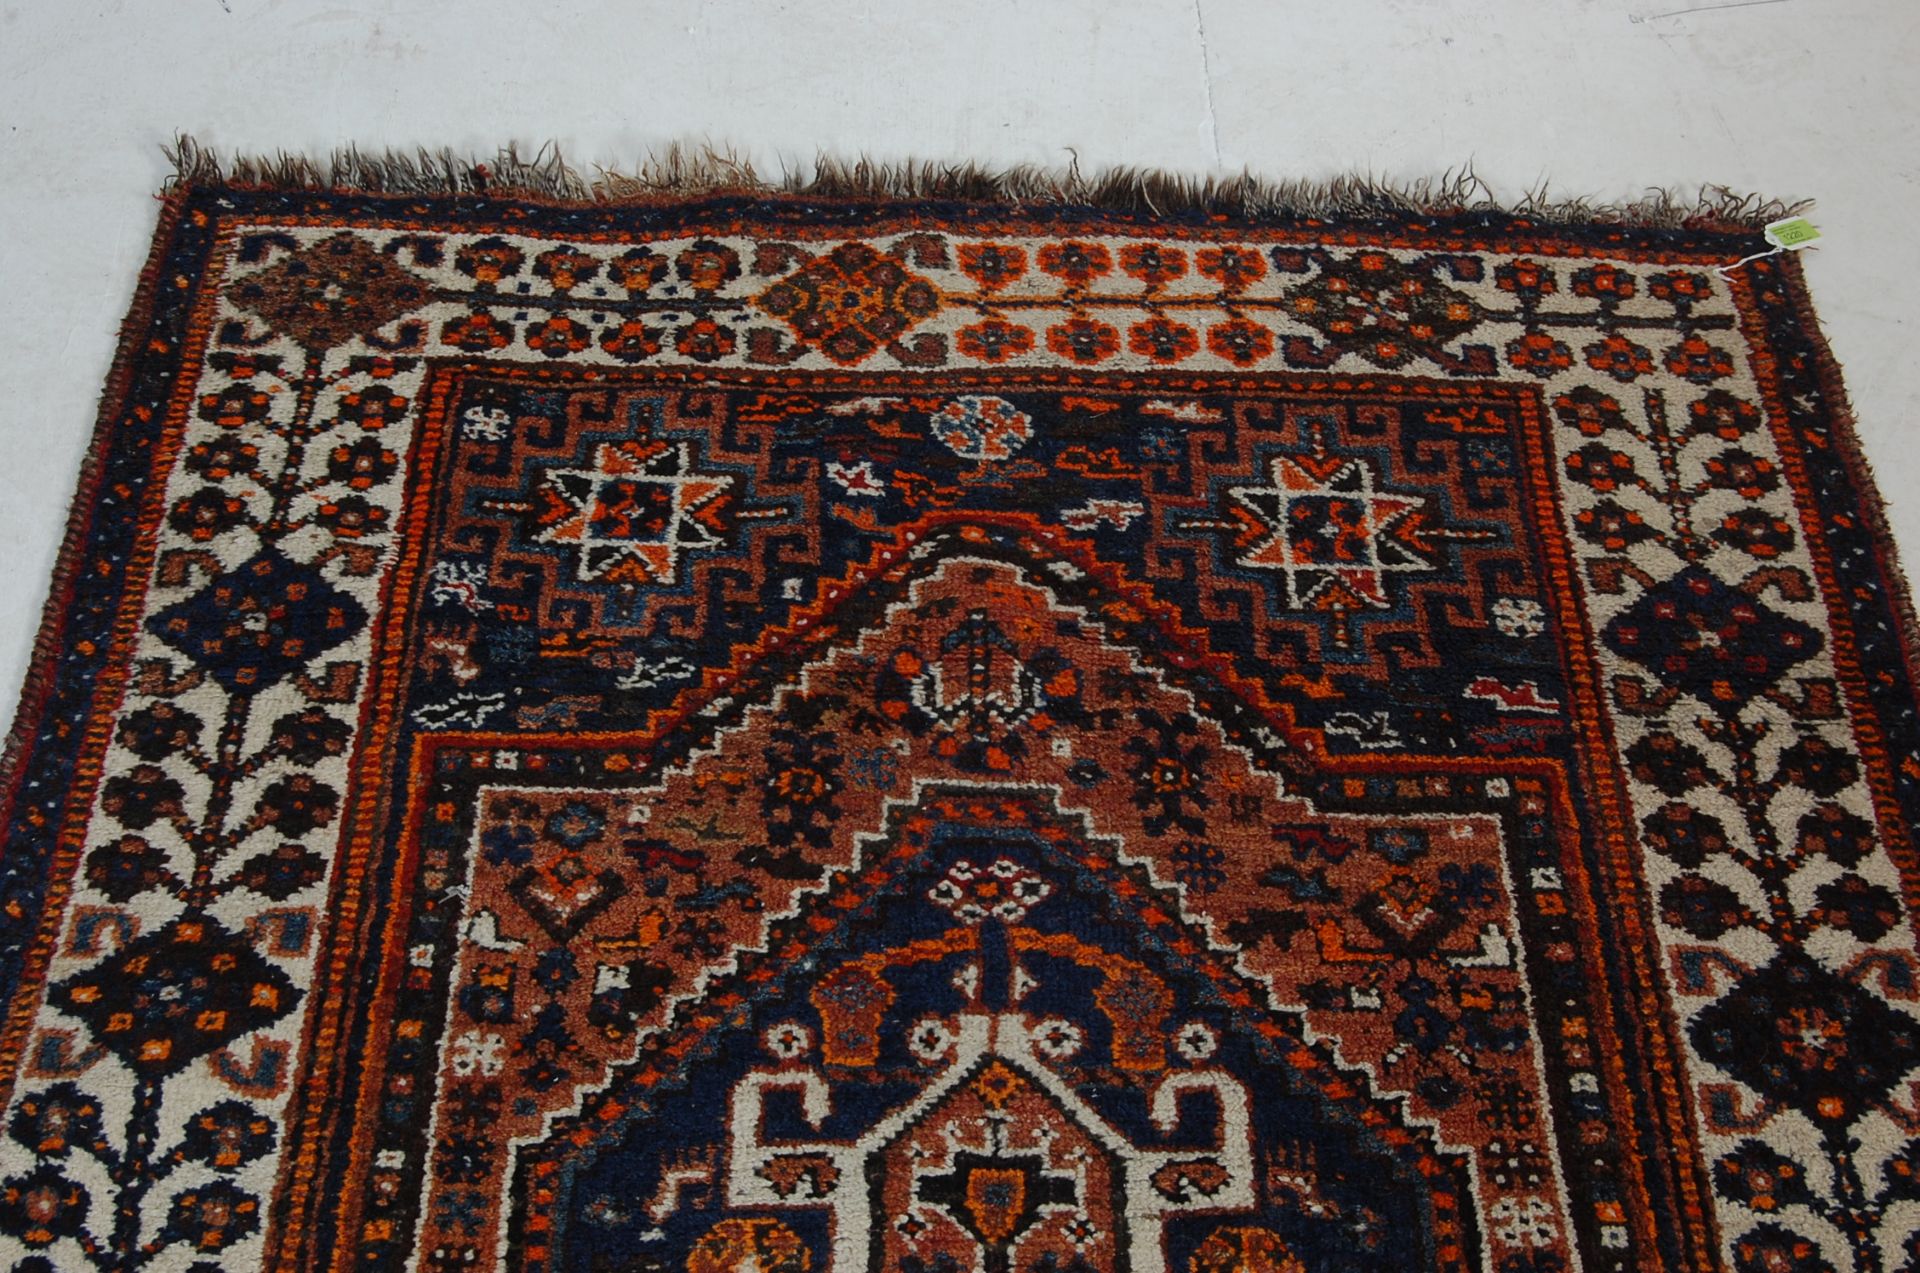 EARLY 20TH CENTURY NATURAL DYED AND HAND-WOVEN WOOL AFGHAN RUG / CARPET - Image 5 of 6